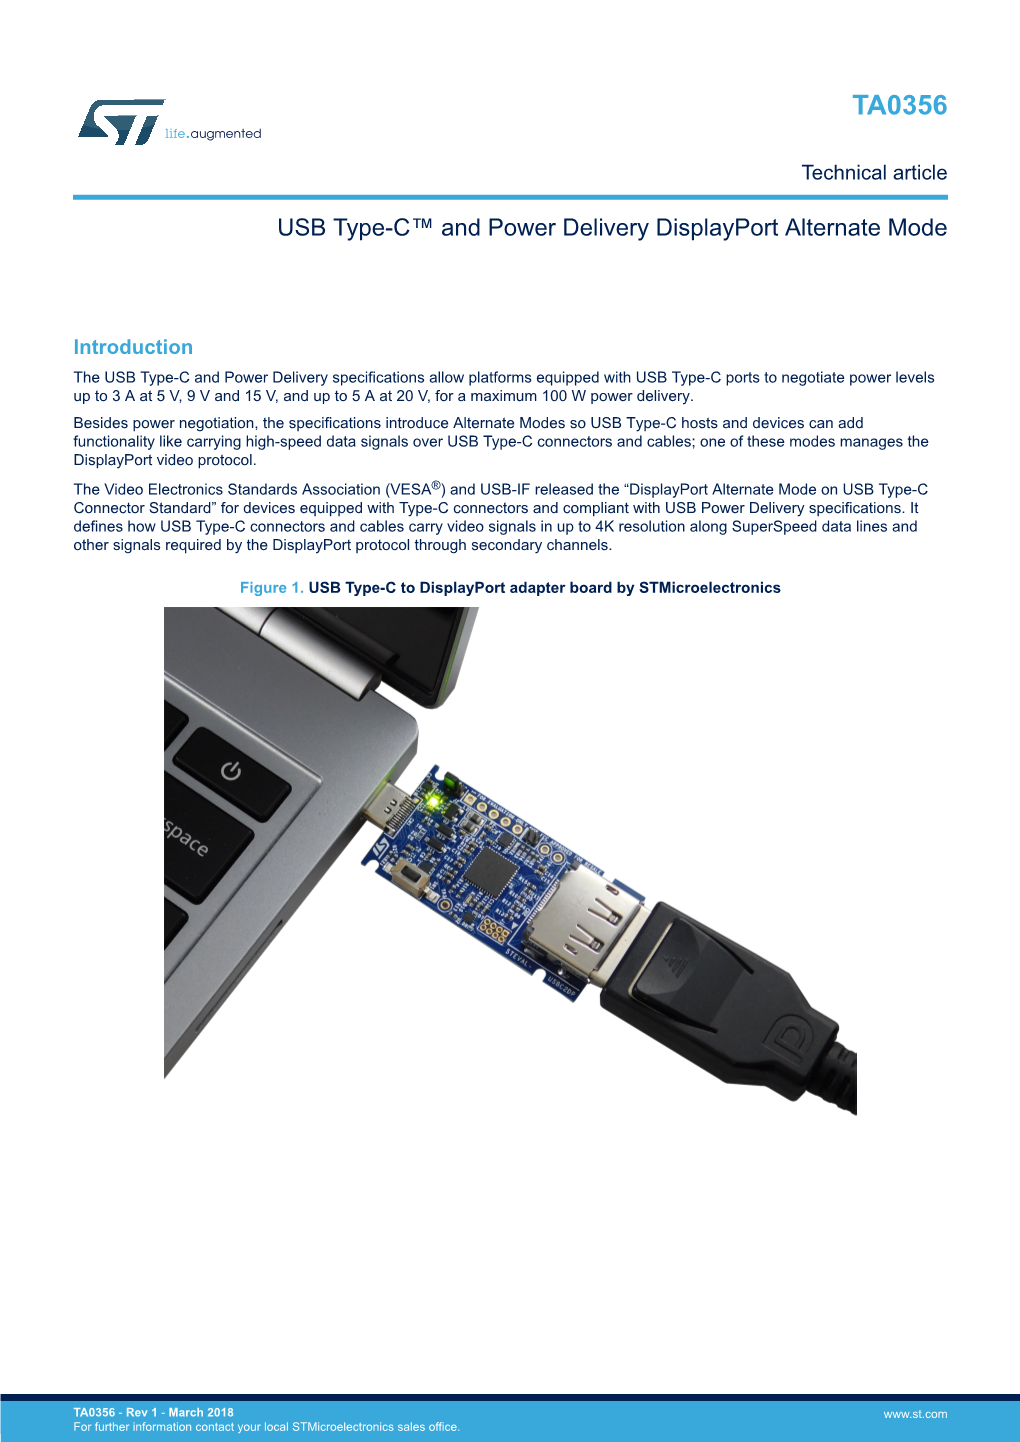 TA0356 USB Type-C™ and Power Delivery Displayport Alternate Mode